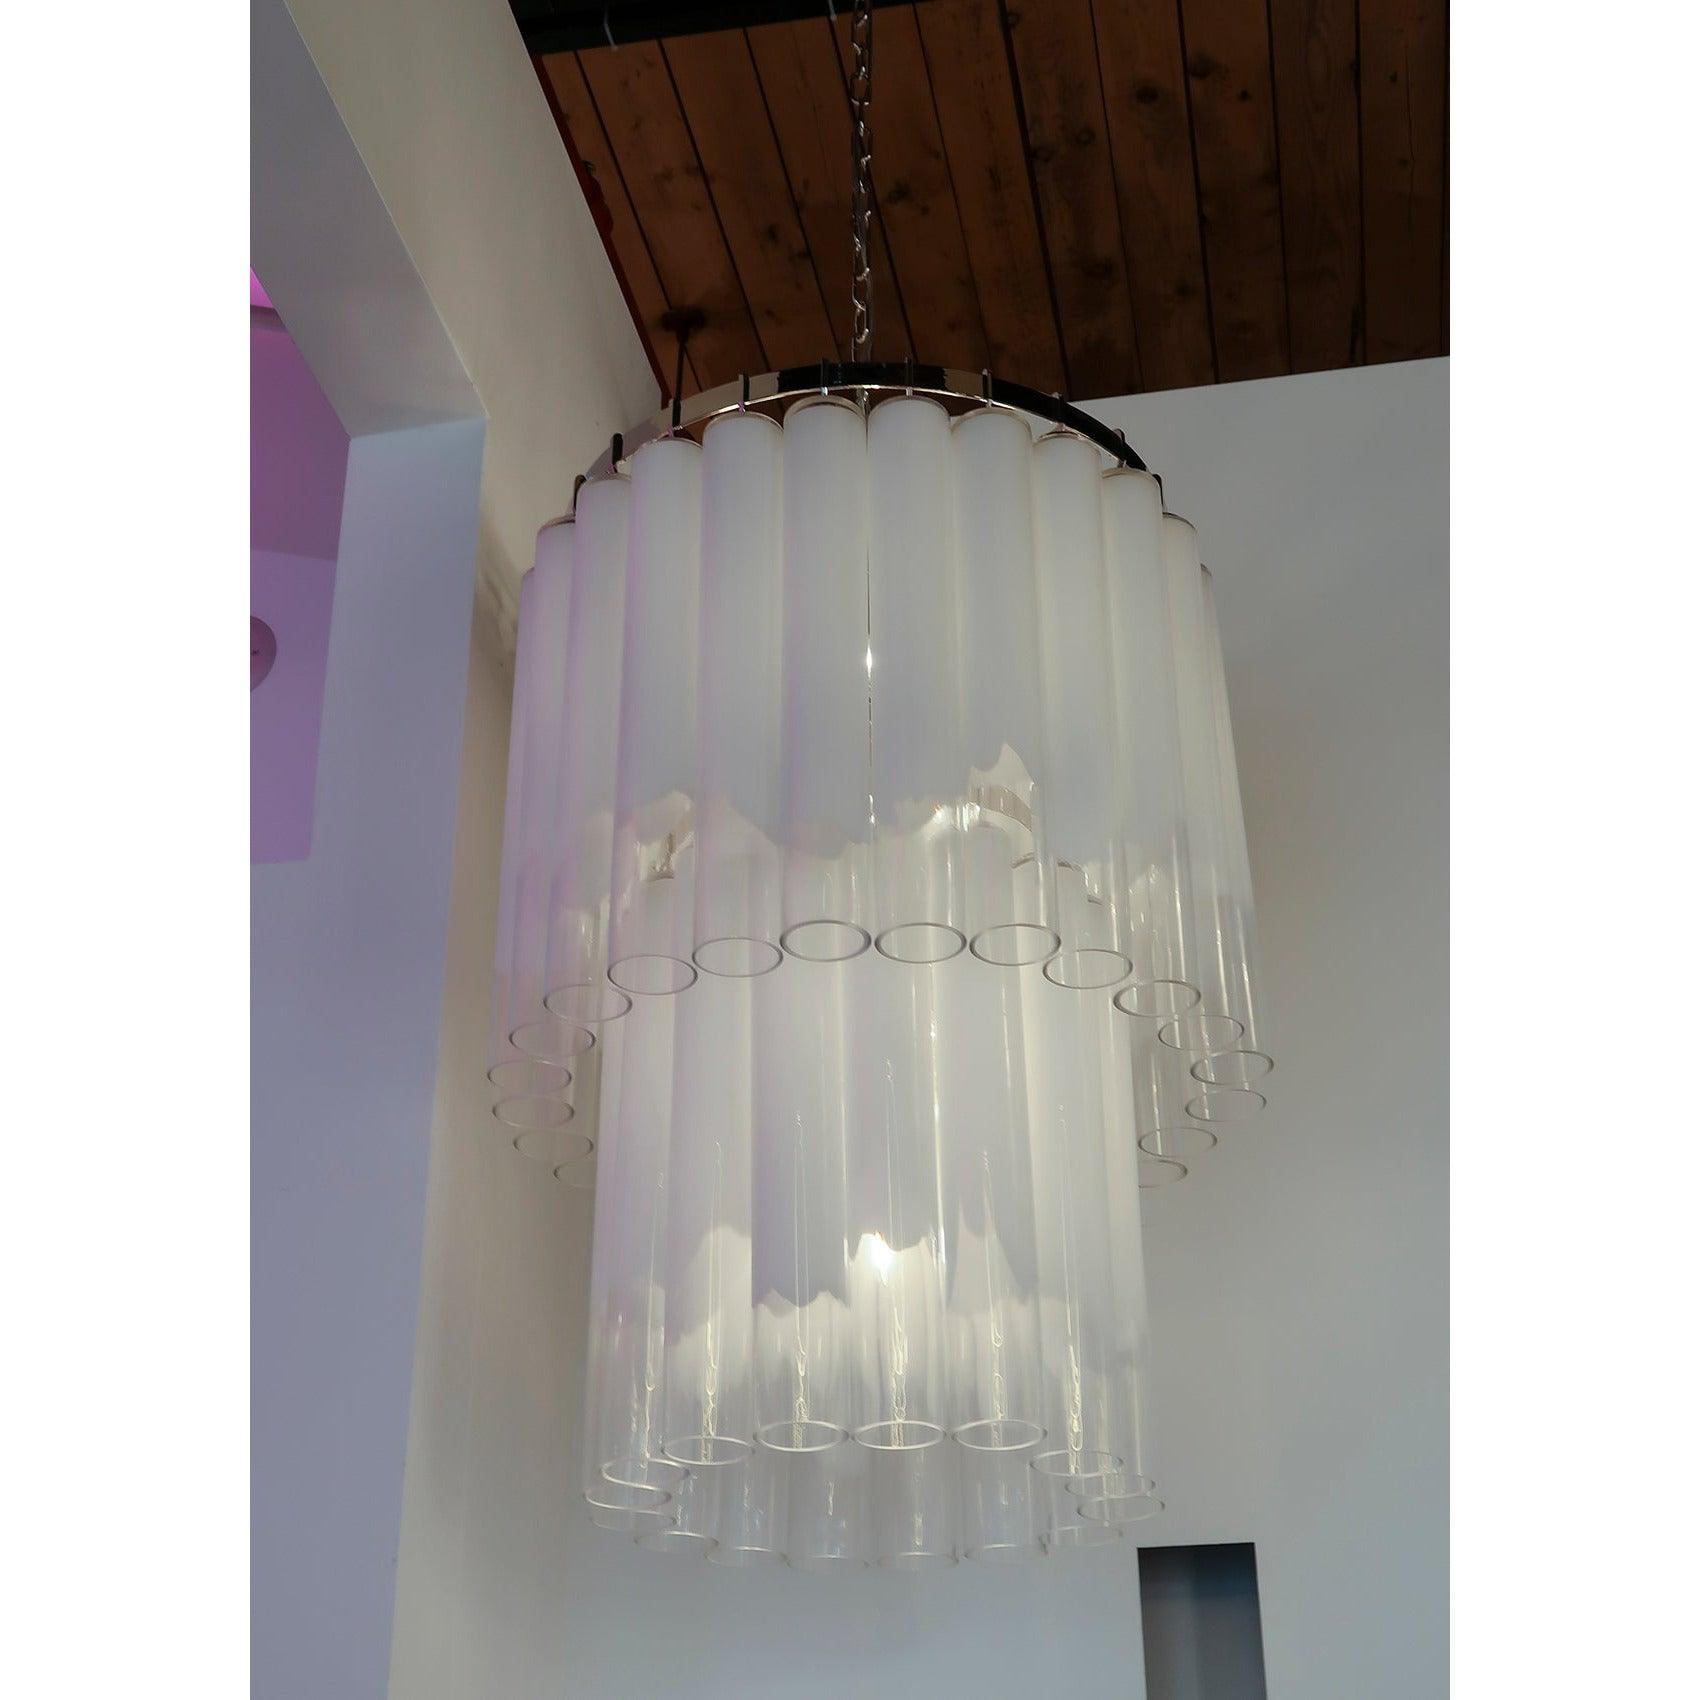 Montreal Lighting & Hardware - Tyrell Pendant by Hudson Valley | OPEN BOX - 8924-PN-OB | Montreal Lighting & Hardware